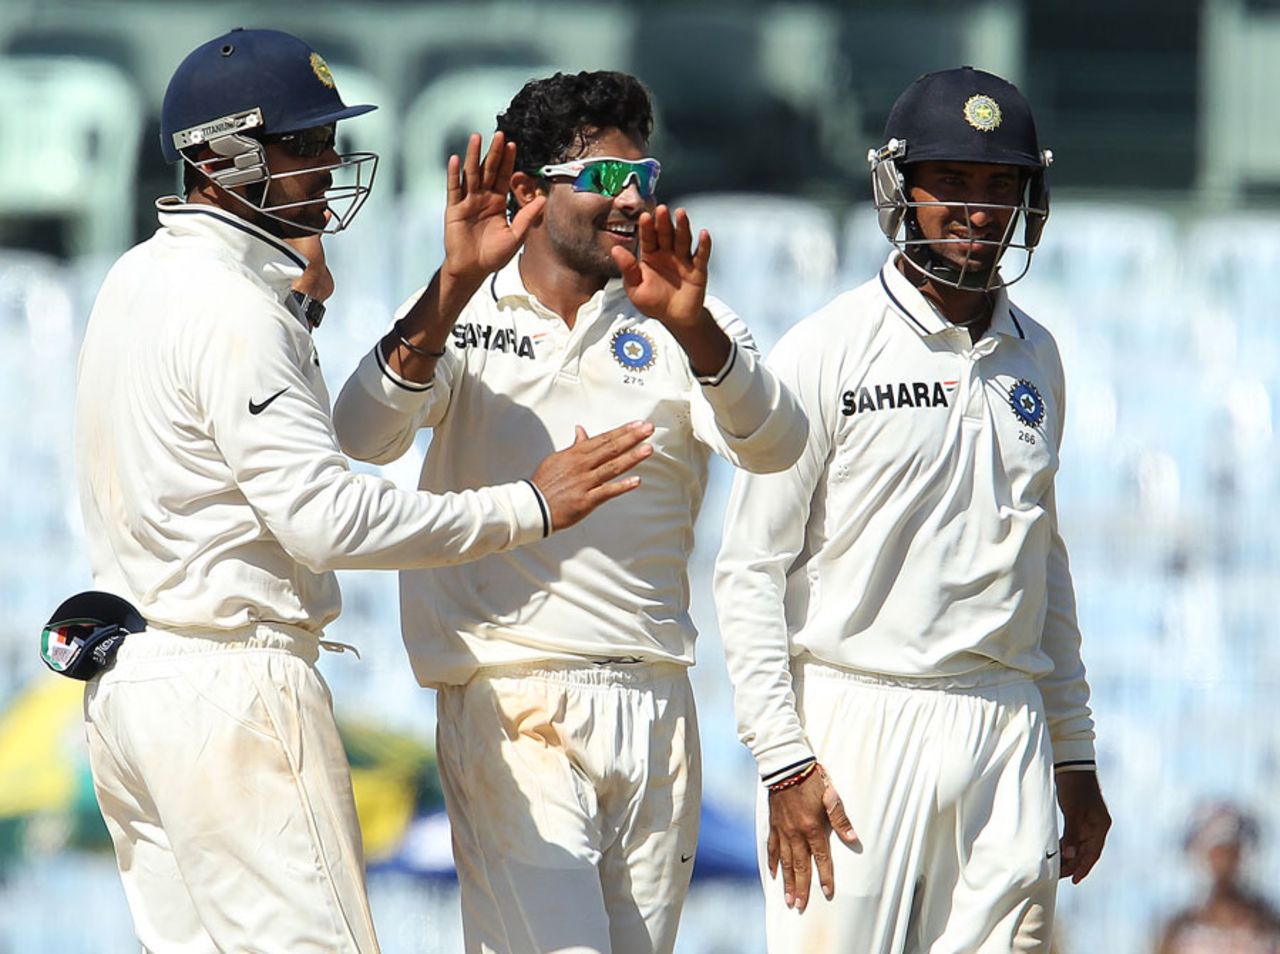 India get together after a wicket, India v Australia, 1st Test, Chennai, 4th day, February 25, 2013